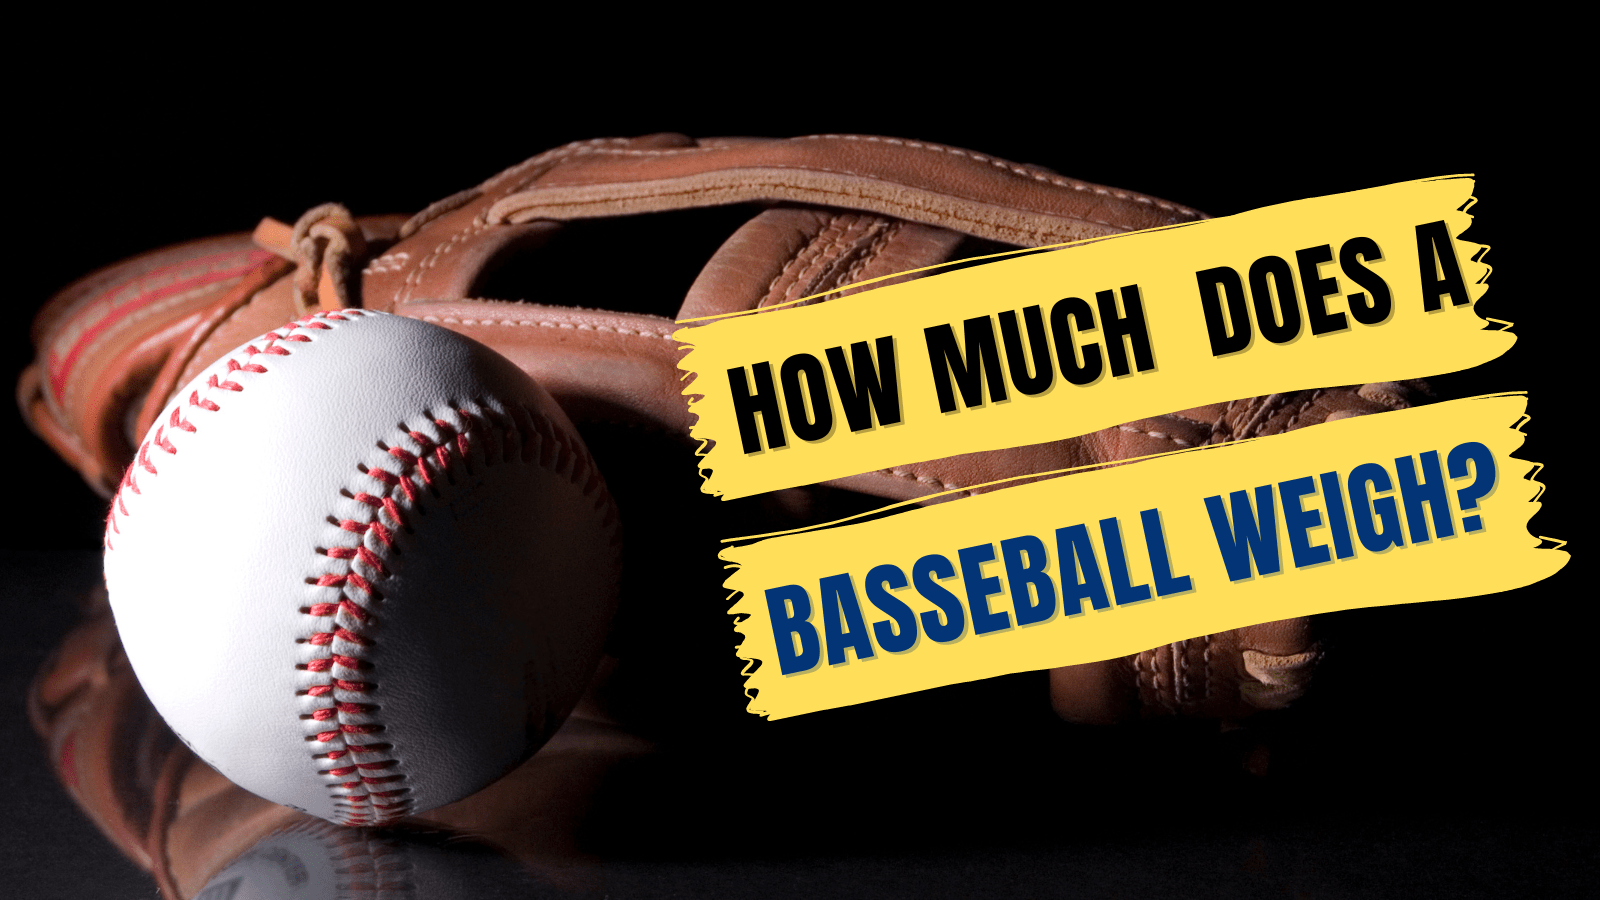 How Much Does a Baseball Weigh?